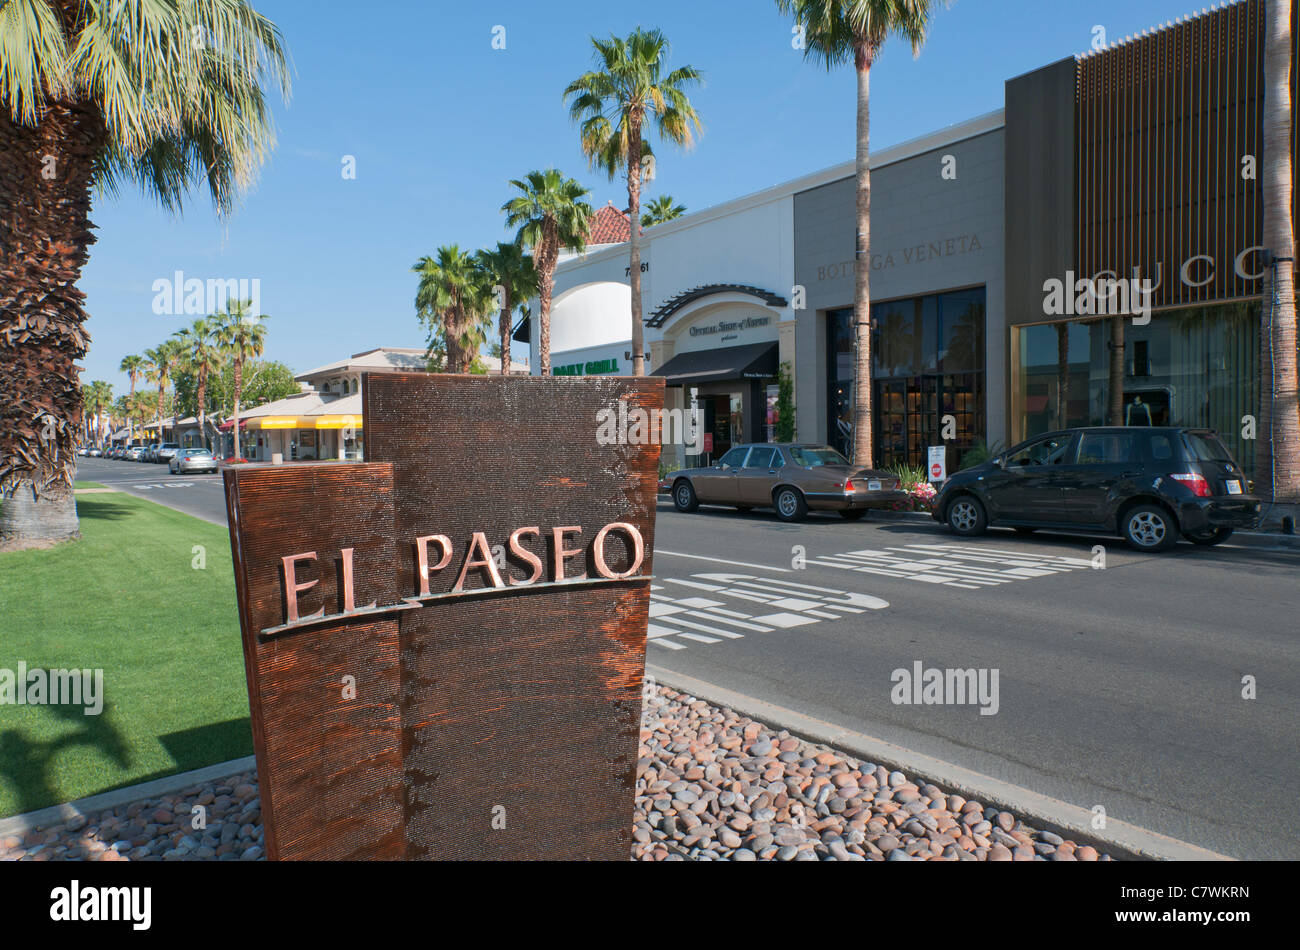 The Shops on El Paseo